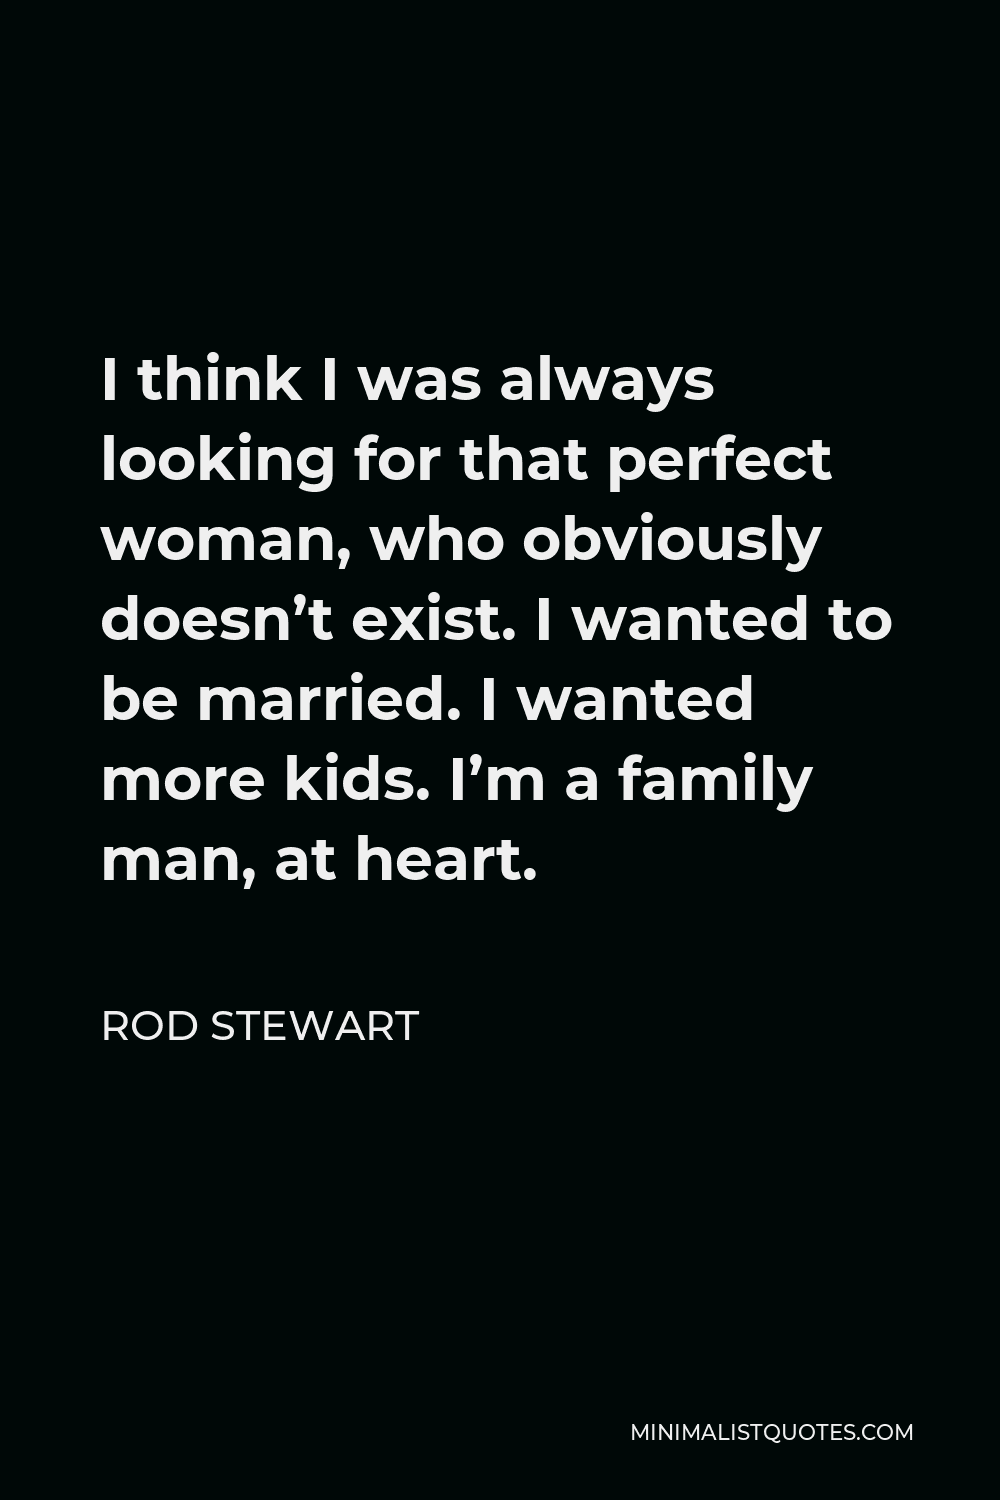 Rod Stewart Quote - I think I was always looking for that perfect woman, who obviously doesn’t exist. I wanted to be married. I wanted more kids. I’m a family man, at heart.